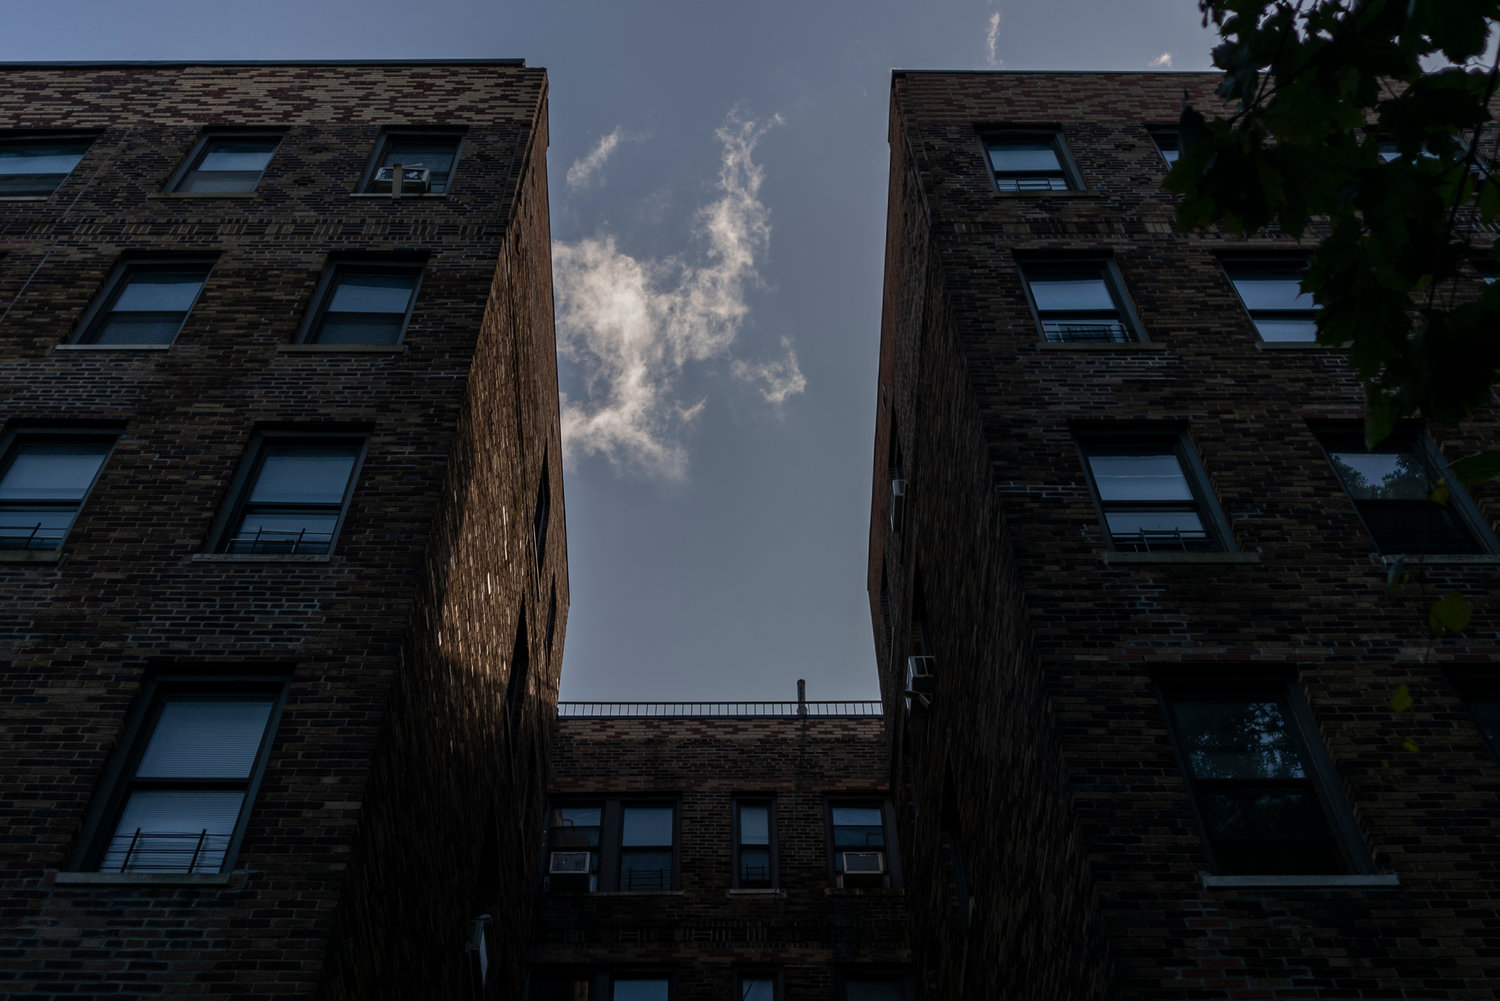 Apartments at 210 W. 262nd St. have seen six evictions over the last two years. While evictions have been in the news as housing activists advocate for extended eviction moratoriums, they’re nothing new for thousands of people across the city.